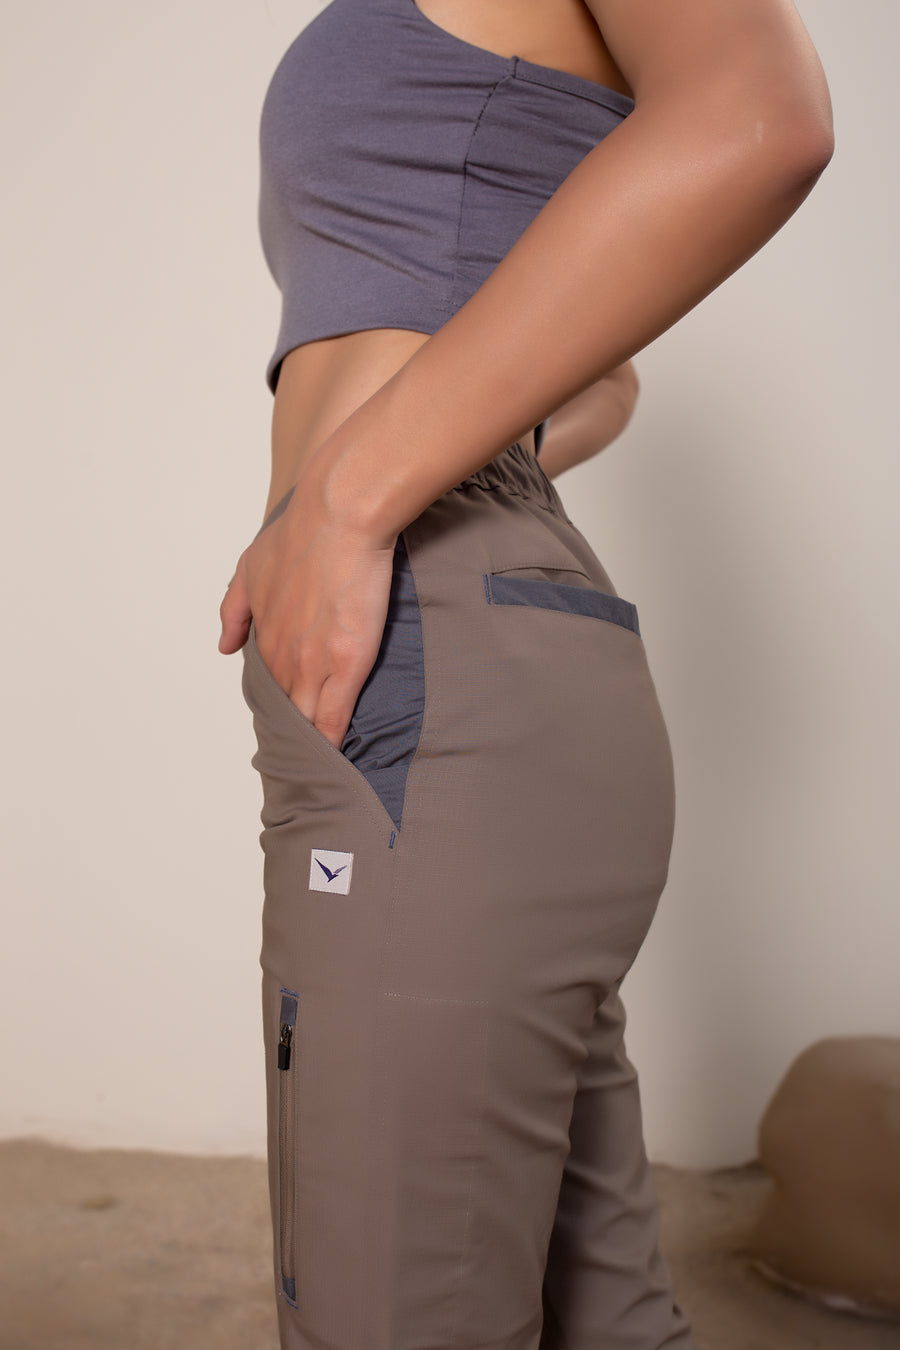 Women's Yosemite Rip Stop in Coffee | VOLO Apparel | Made with a durable stretch rip stop, the Yosemite Rip Stop pant is our ultimate six pocket lifestyle pant. Featuring a 3 point gusset, snap button security pockets, 2 zipper pockets and the comfort of cotton ripstop, these are your go to adventure pants. Designed to take you from the summit, to the city.